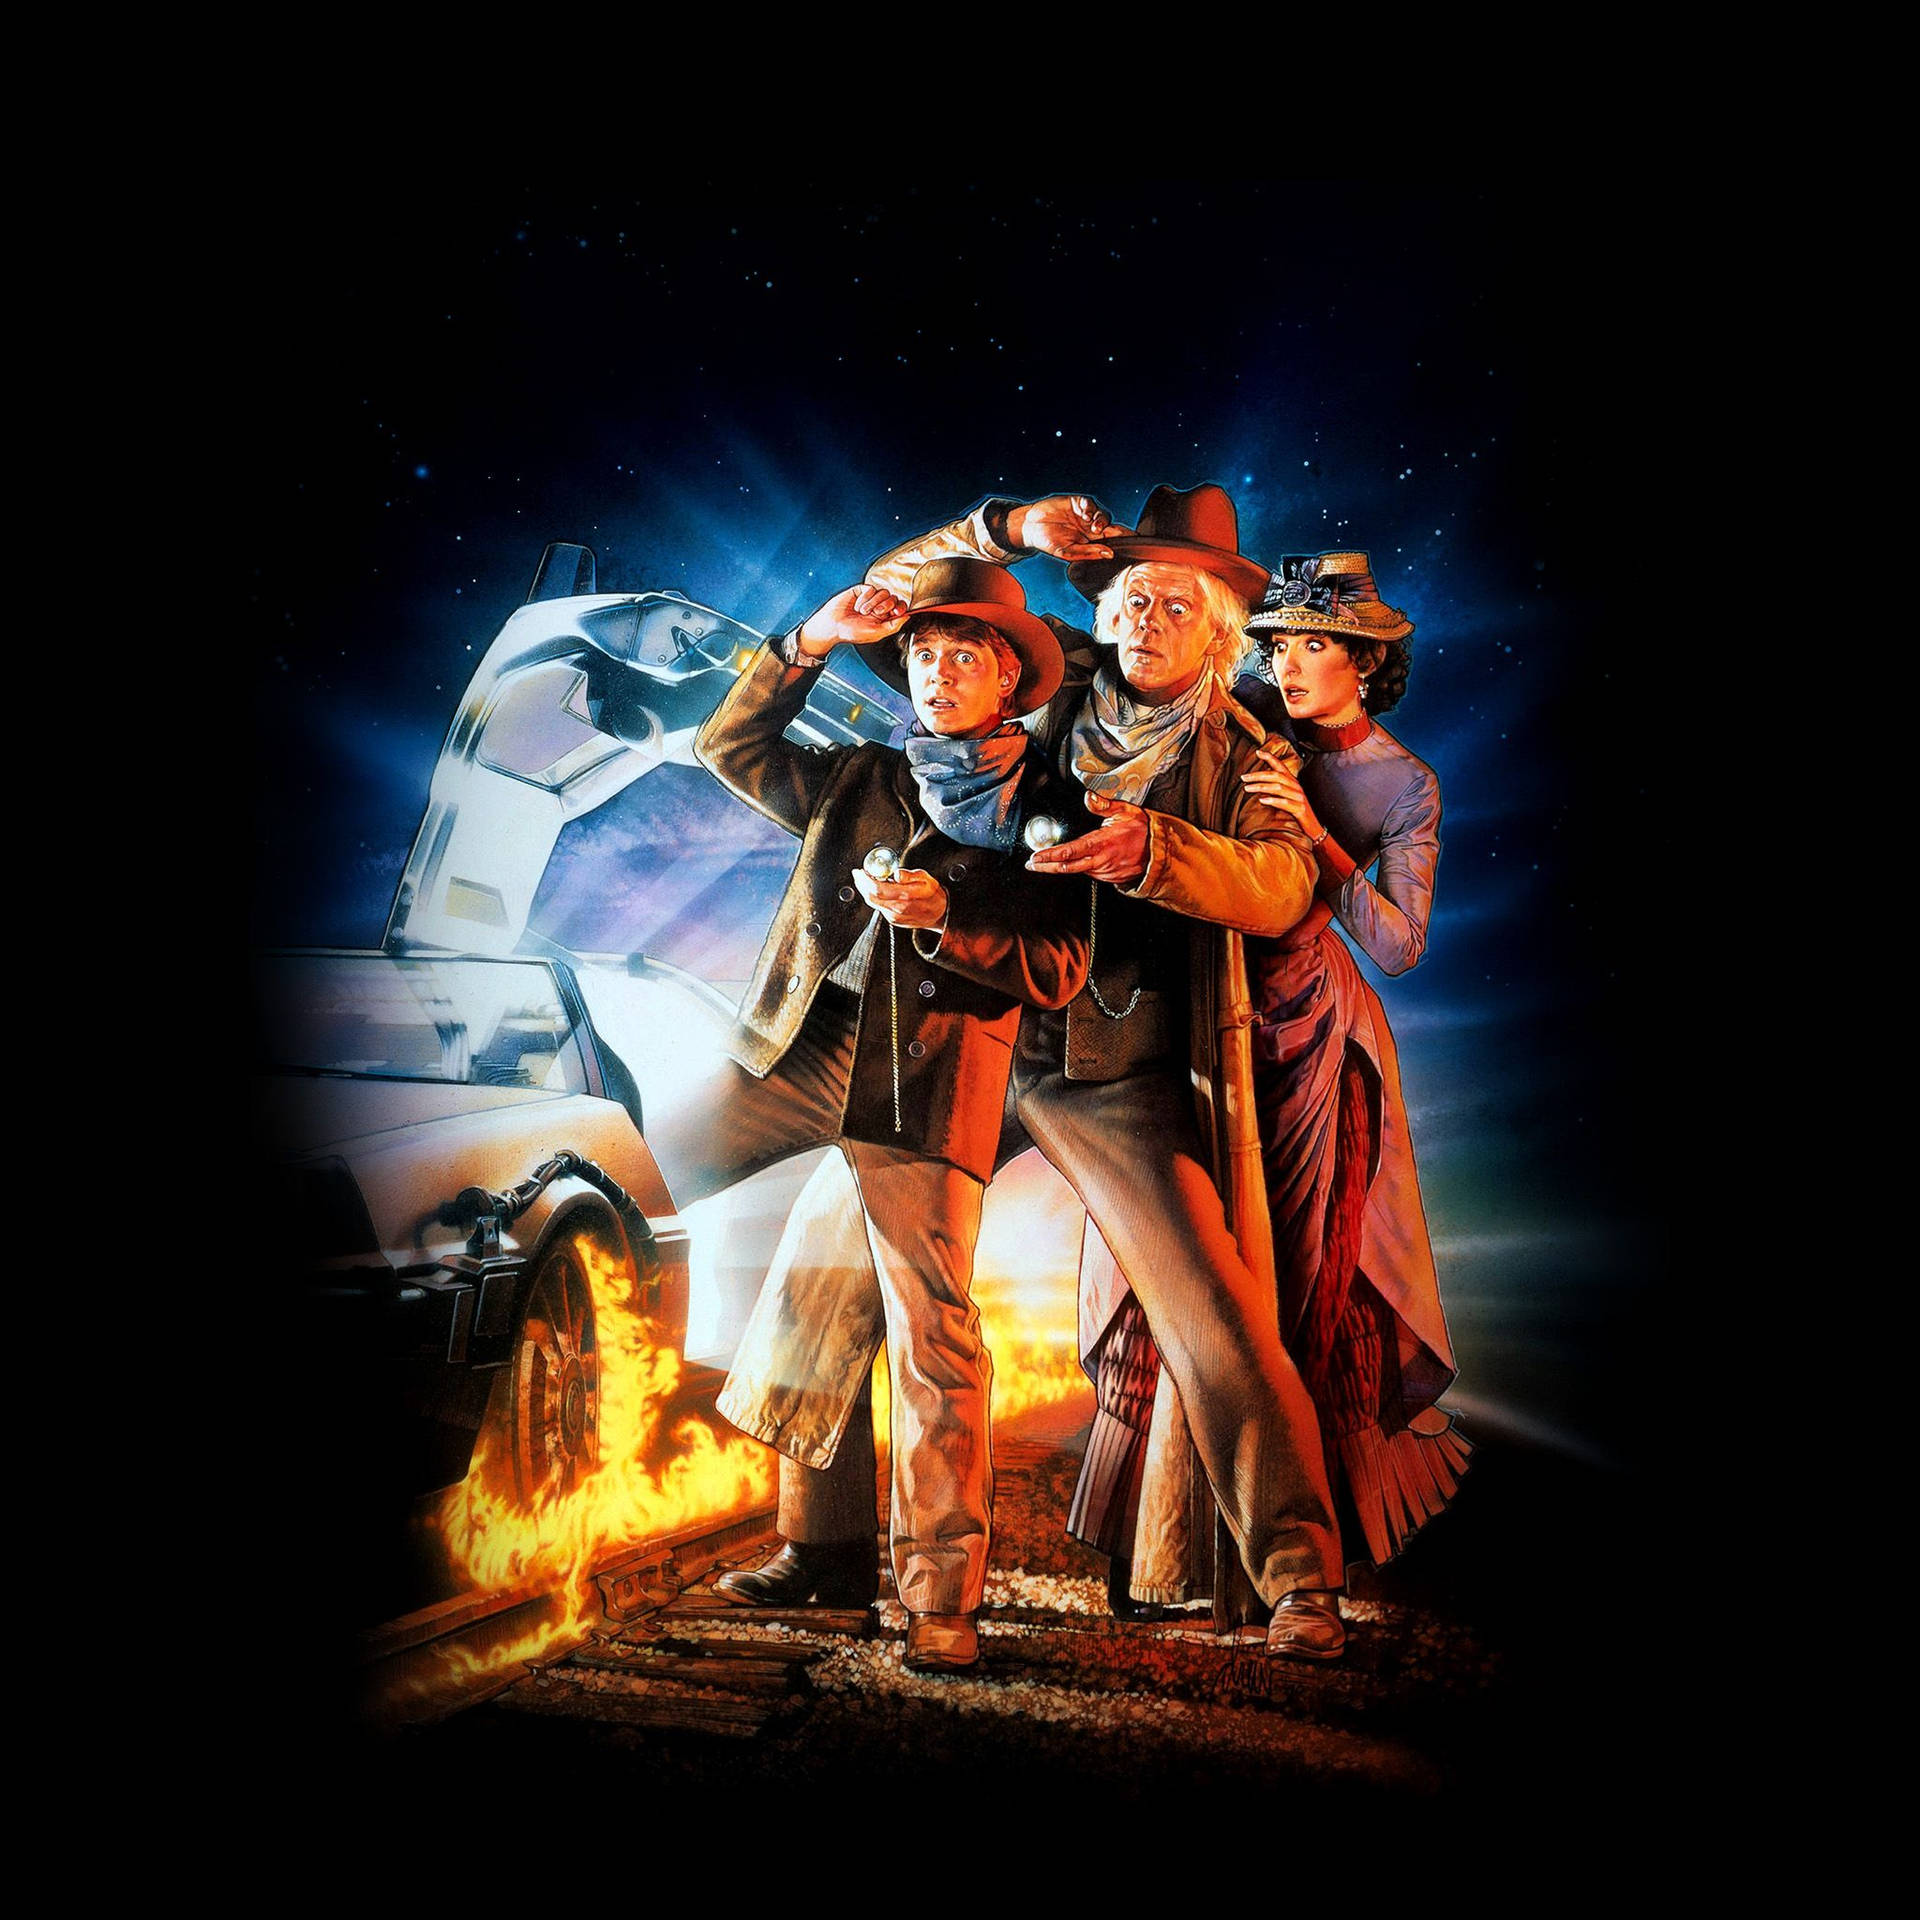 Free Back To The Future Wallpaper Downloads 100 Back To The Future Wallpapers For Free Wallpapers Com